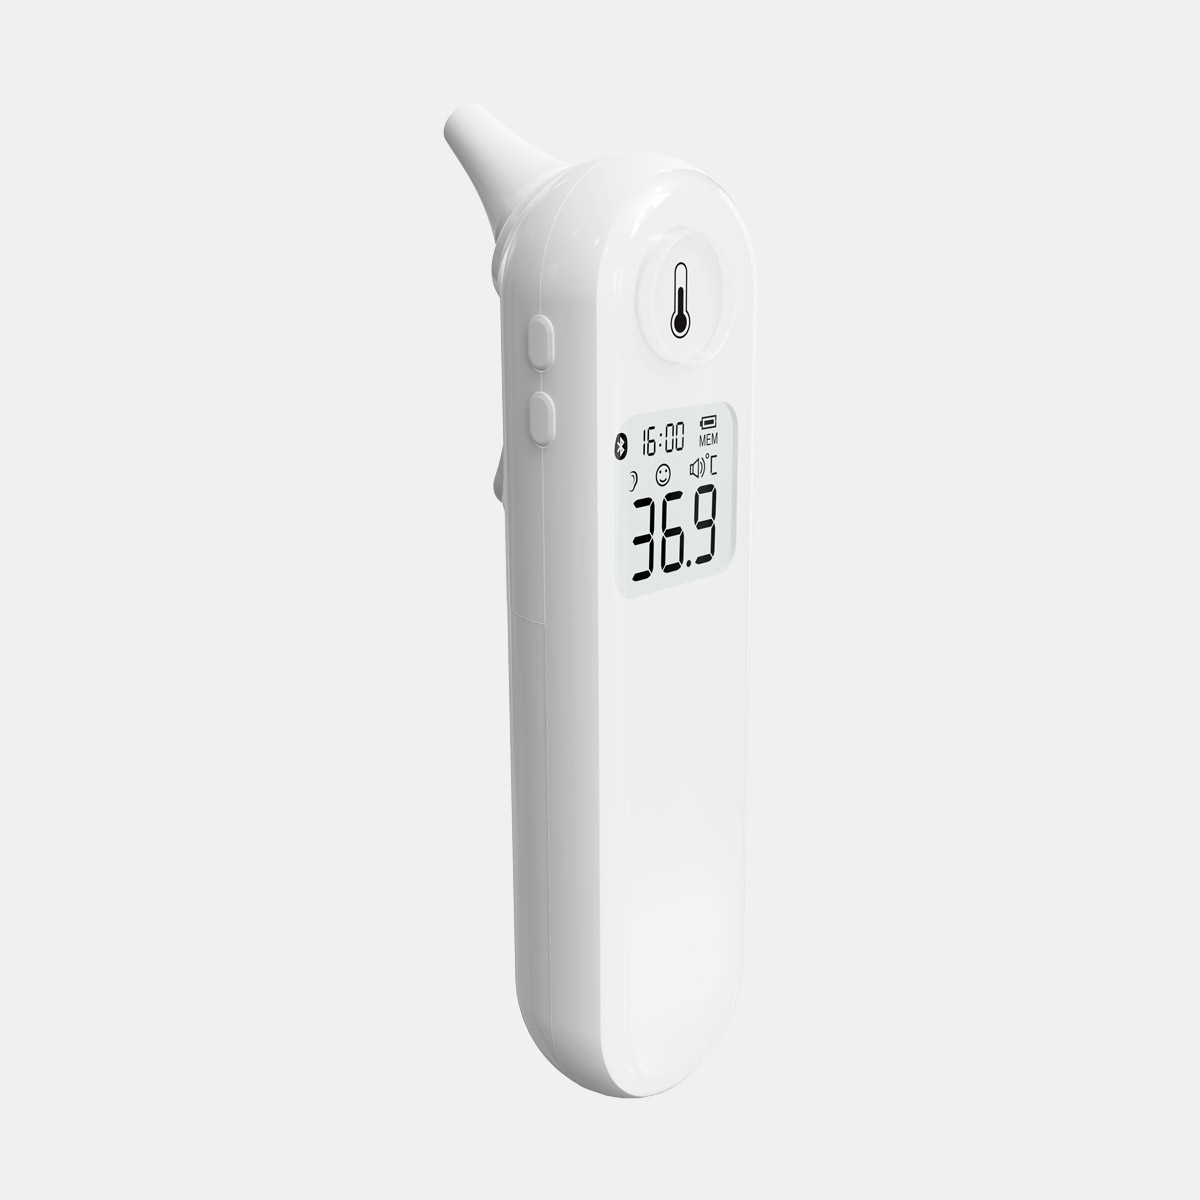 Naupangte tan In lama CE MDR Infrared Ear Thermometer dik tak pahnihna